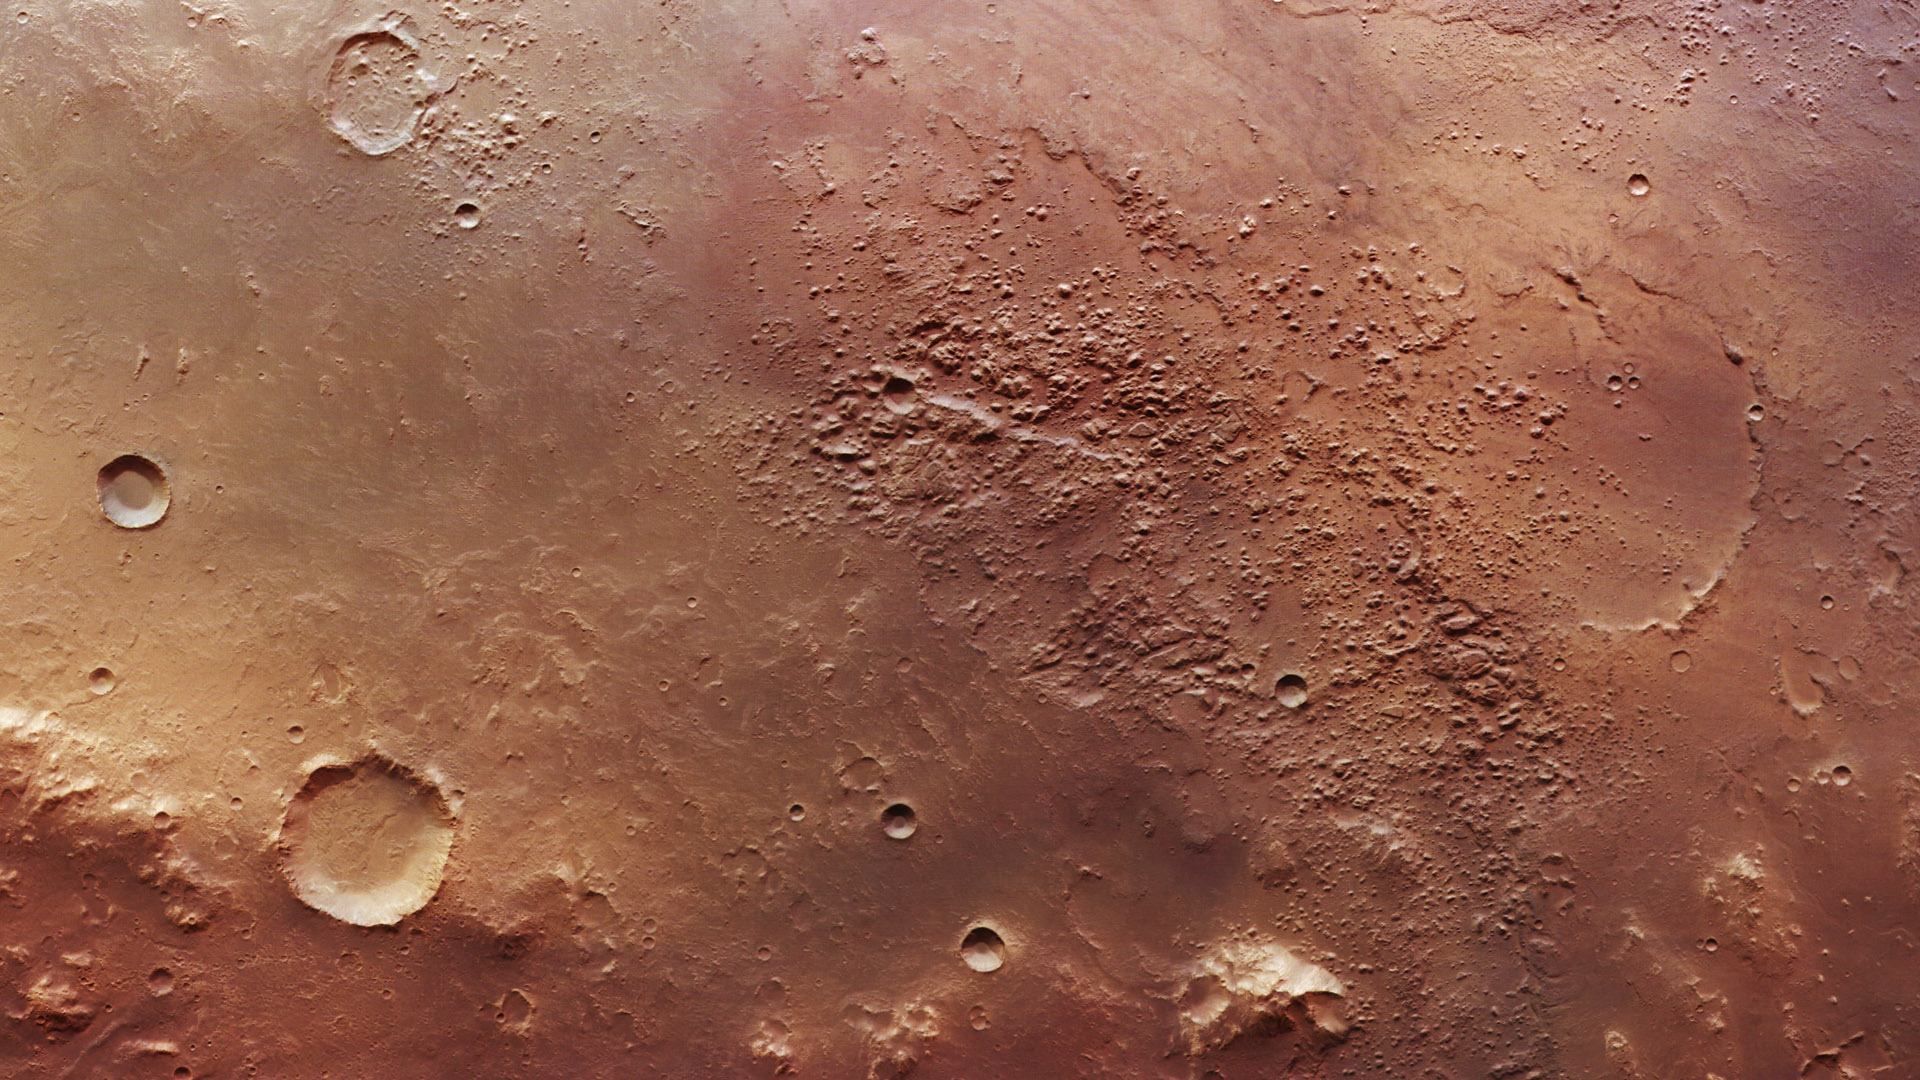 New images of ancient waterways of Mars could unlock the secrets of planet's past